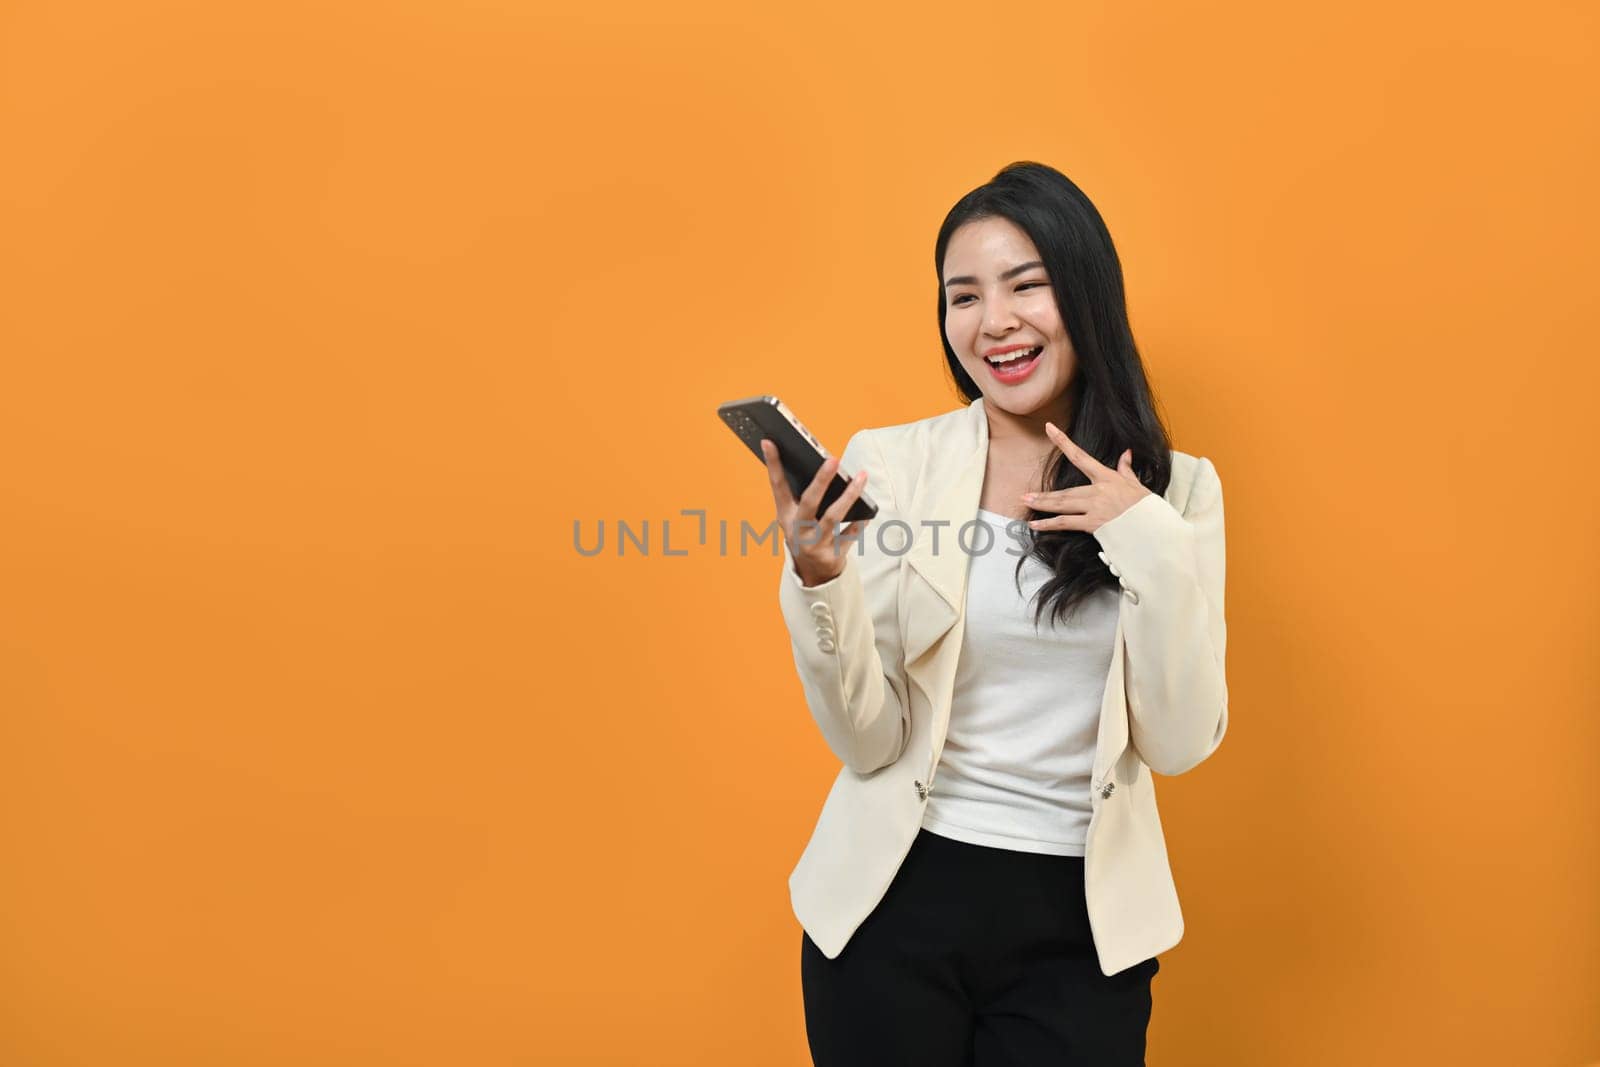 Cheerful asian woman in business suit holding smart phone in hands, standing on yellow background.